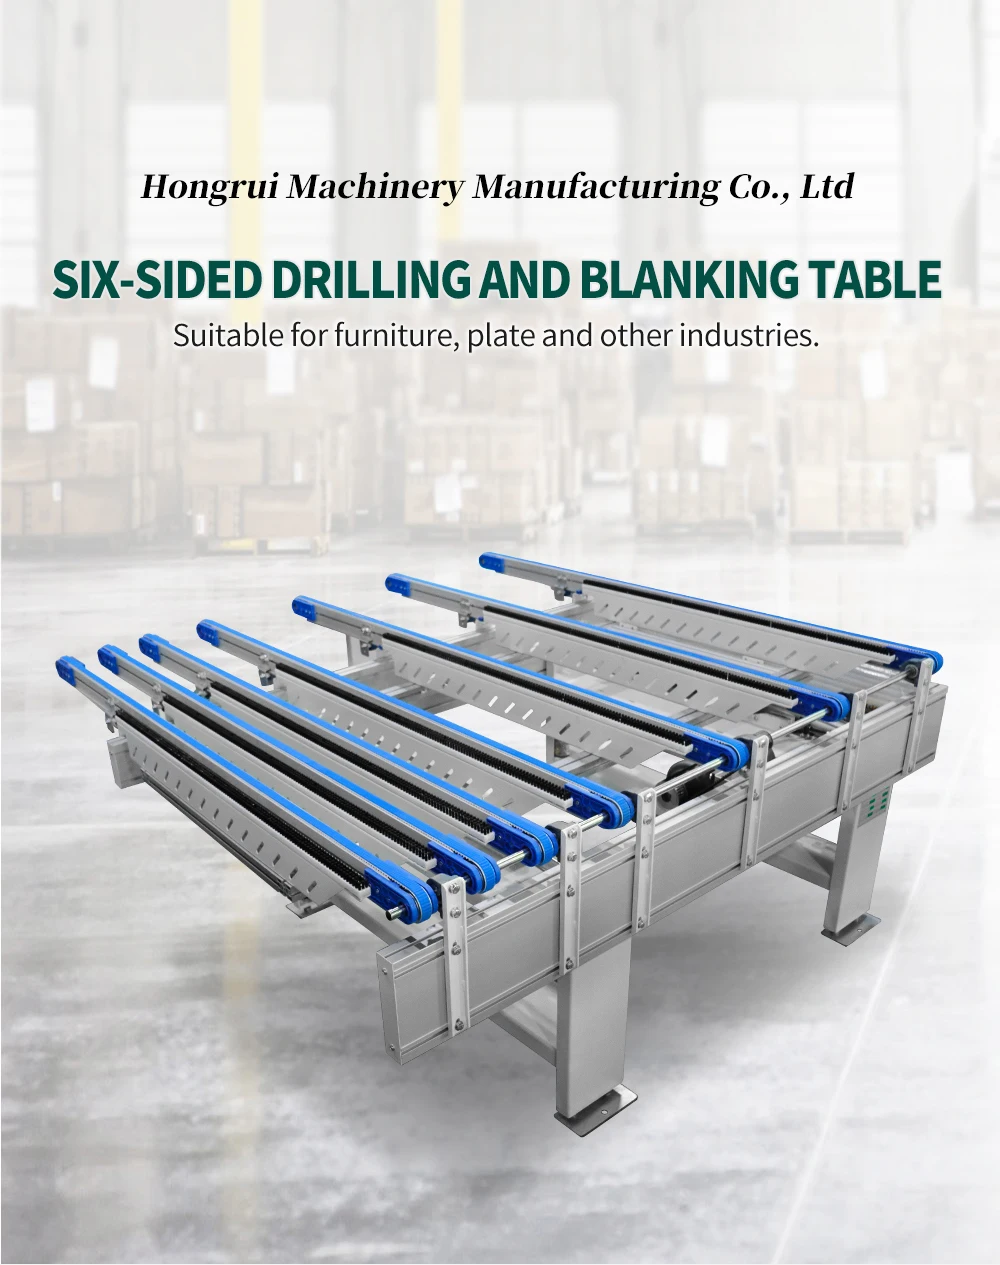 Automatic feeding and discharging table of Hongrui roller type six-sided drill details